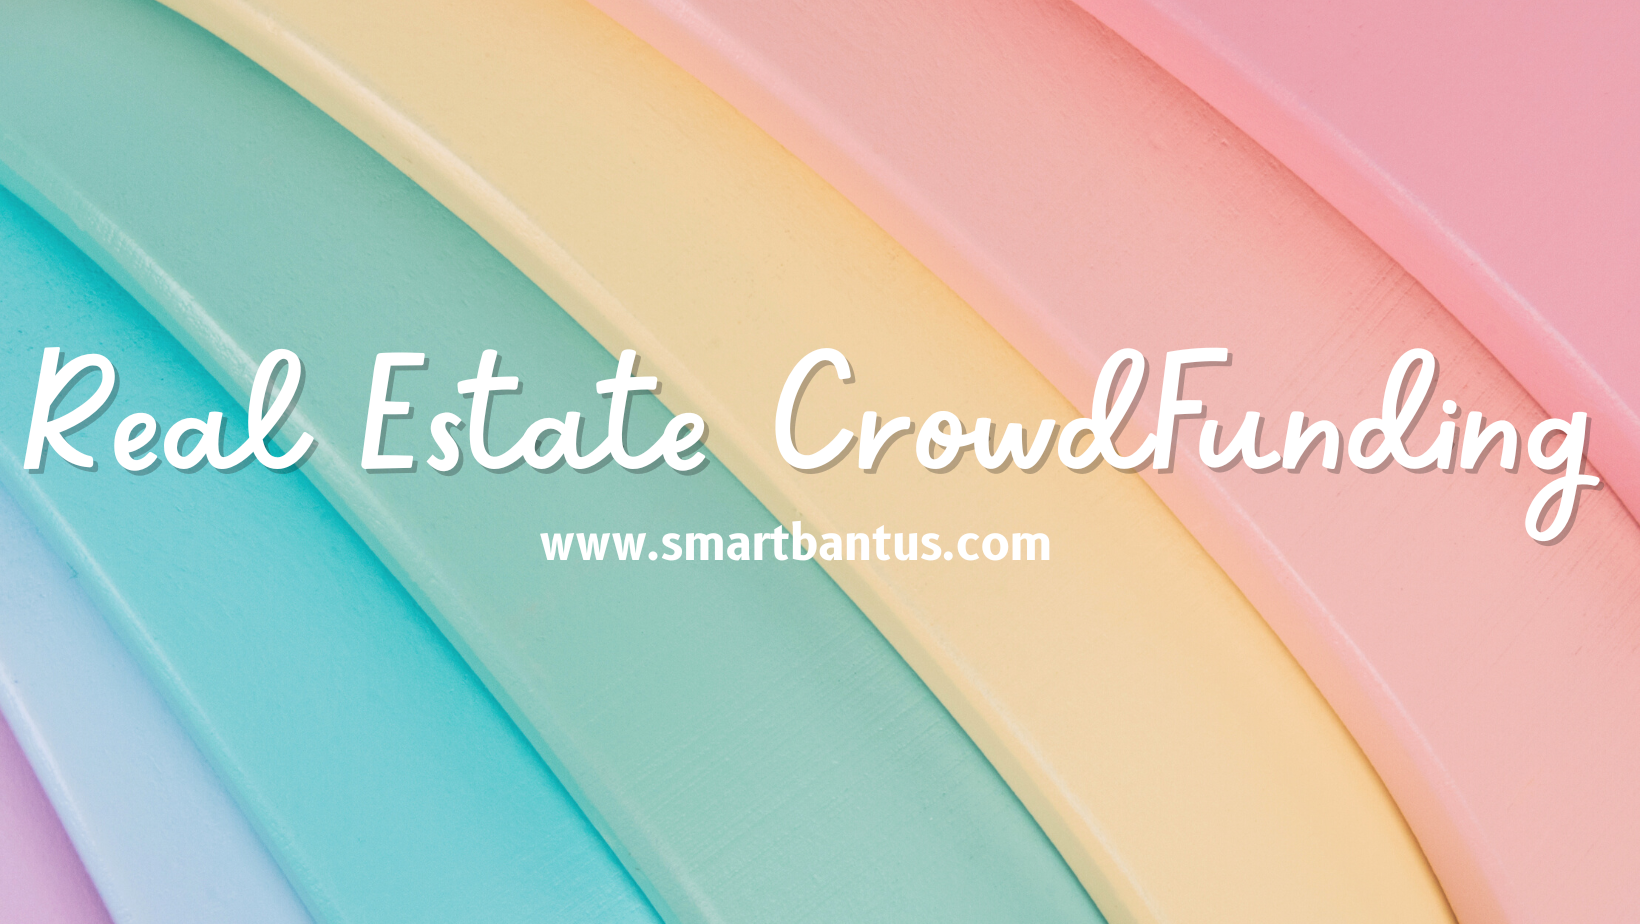 Why Invest Through Real Estate Crowdfunding - SmartBantus?